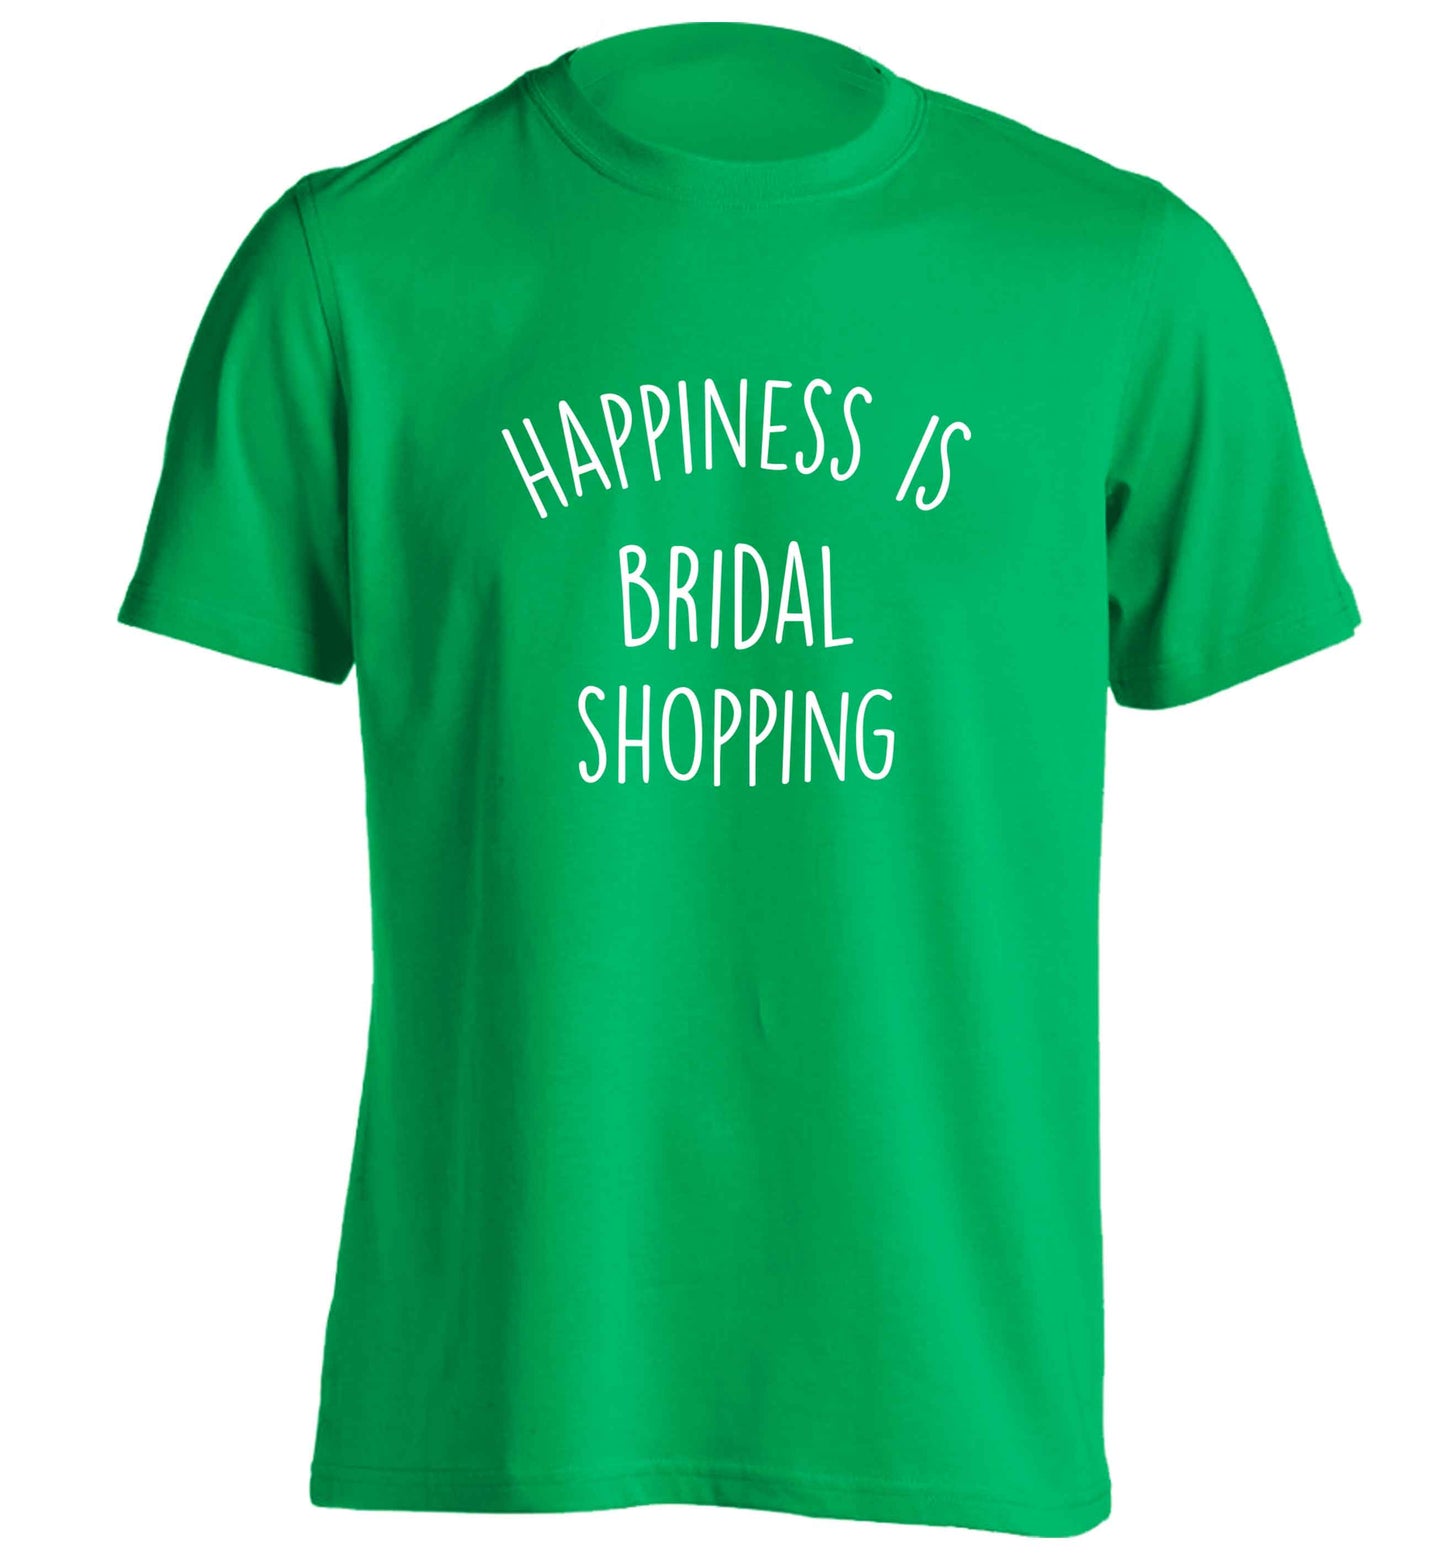 Happiness is bridal shopping adults unisex green Tshirt 2XL